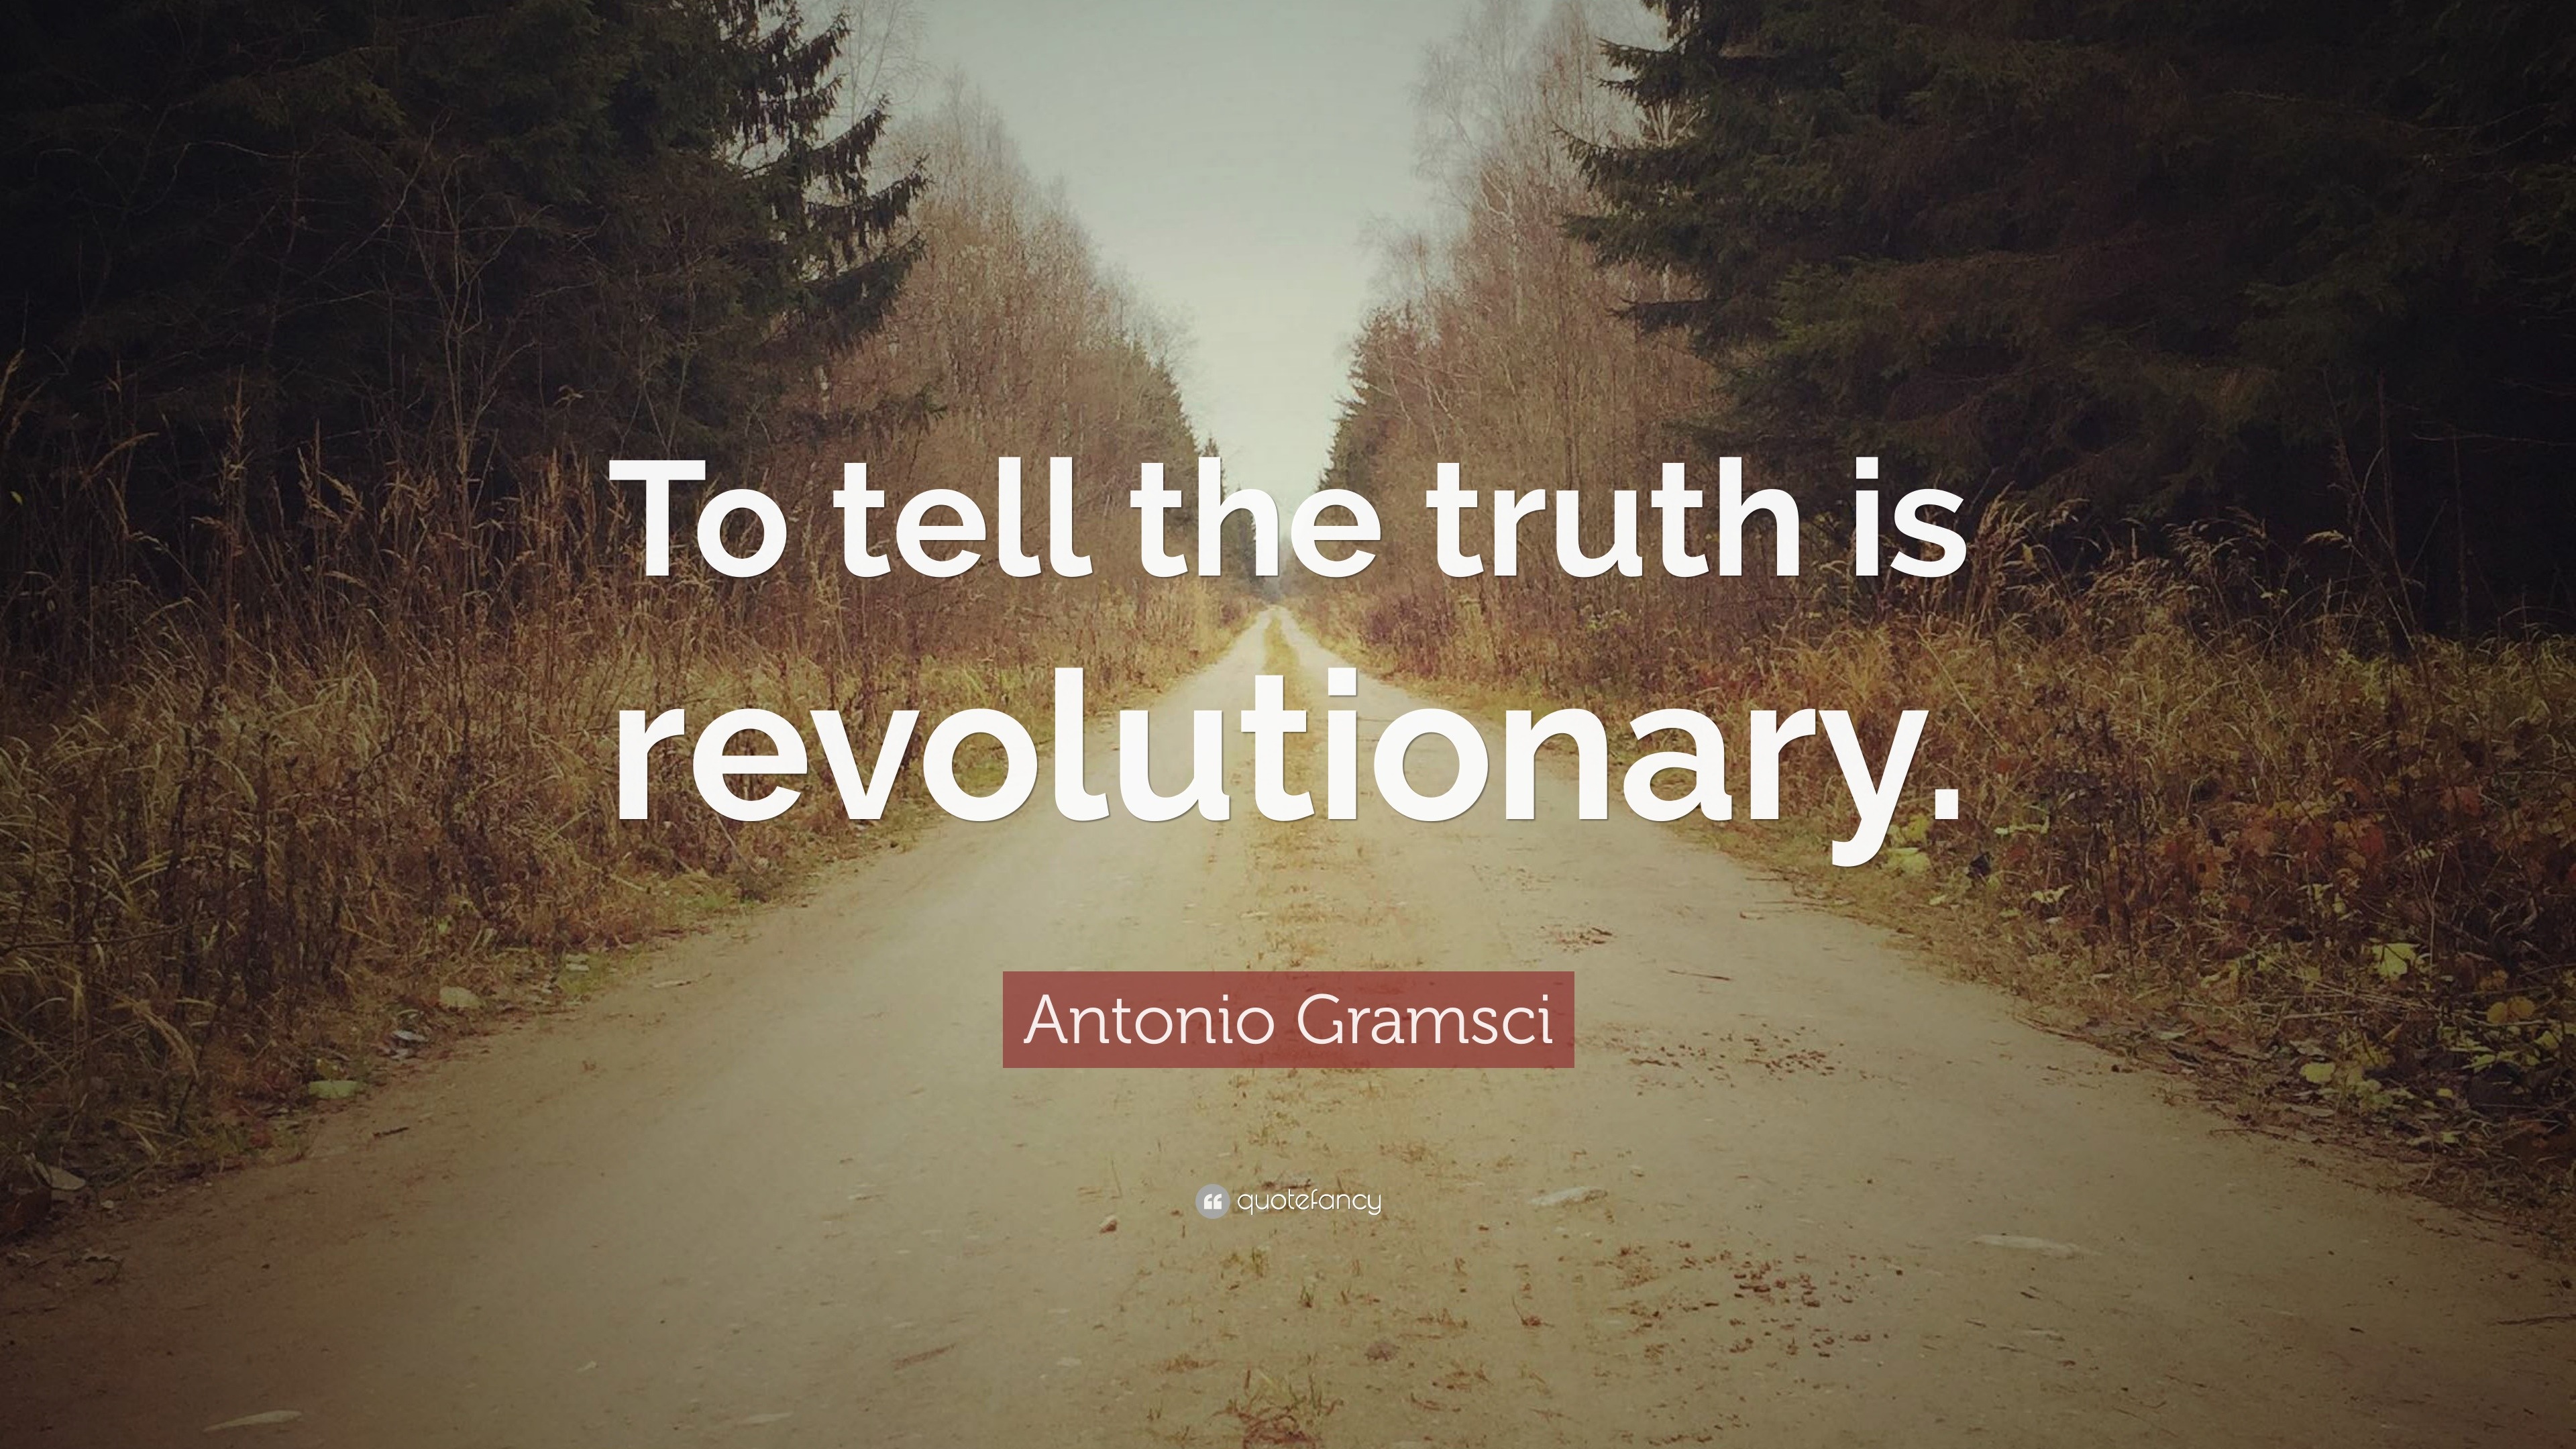 famous quotes about telling the truth